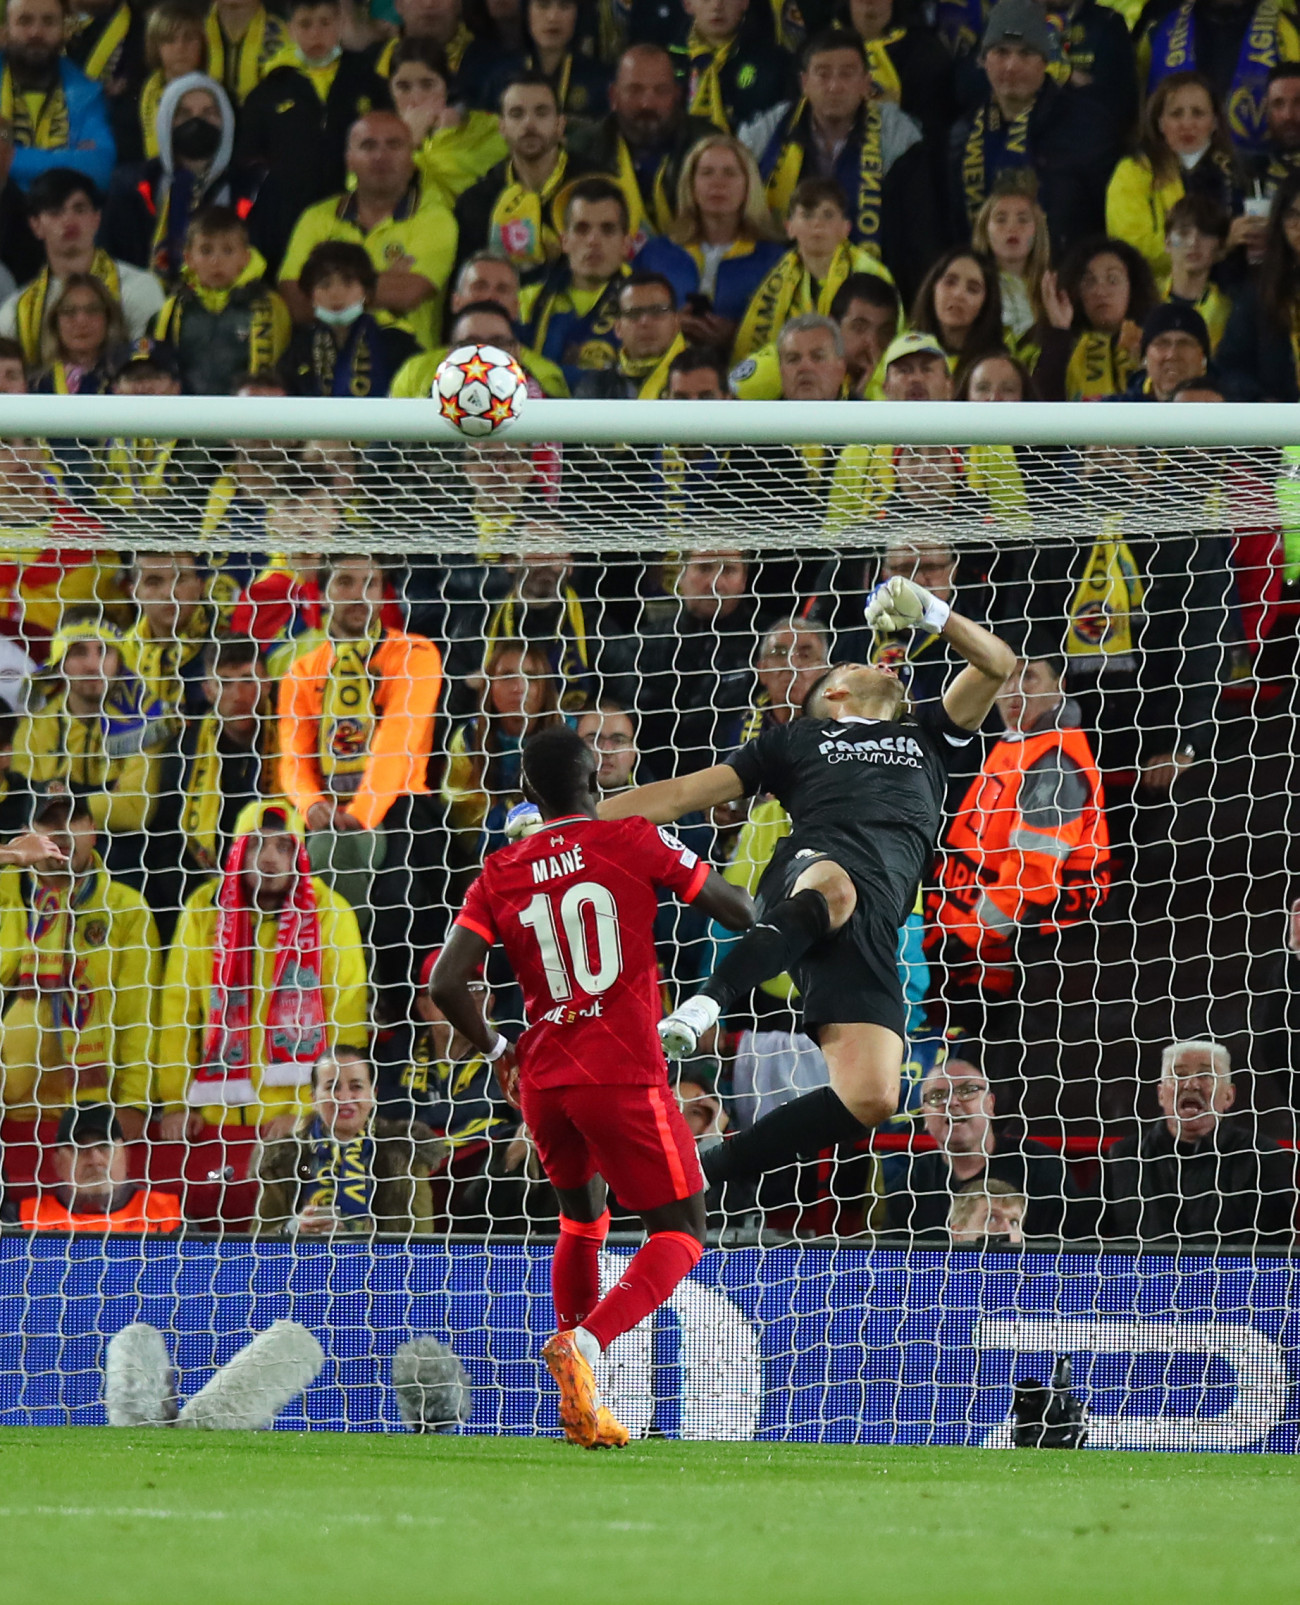 LIVERPOOL, ENGLAND - APRIL 27: Goalkeeper Geronimo Rulli of Villarreal fails to stop the ball from entering the net after it took a deflection from Pervis Estupinan following a shot by Jordan Henderson of Liverpool to make the score 1-0 during the UEFA Champions League Semi Final Leg One match between Liverpool and Villarreal at Anfield on April 27, 2022 in Liverpool, United Kingdom. (Photo by Robbie Jay Barratt - AMA/Getty Images)